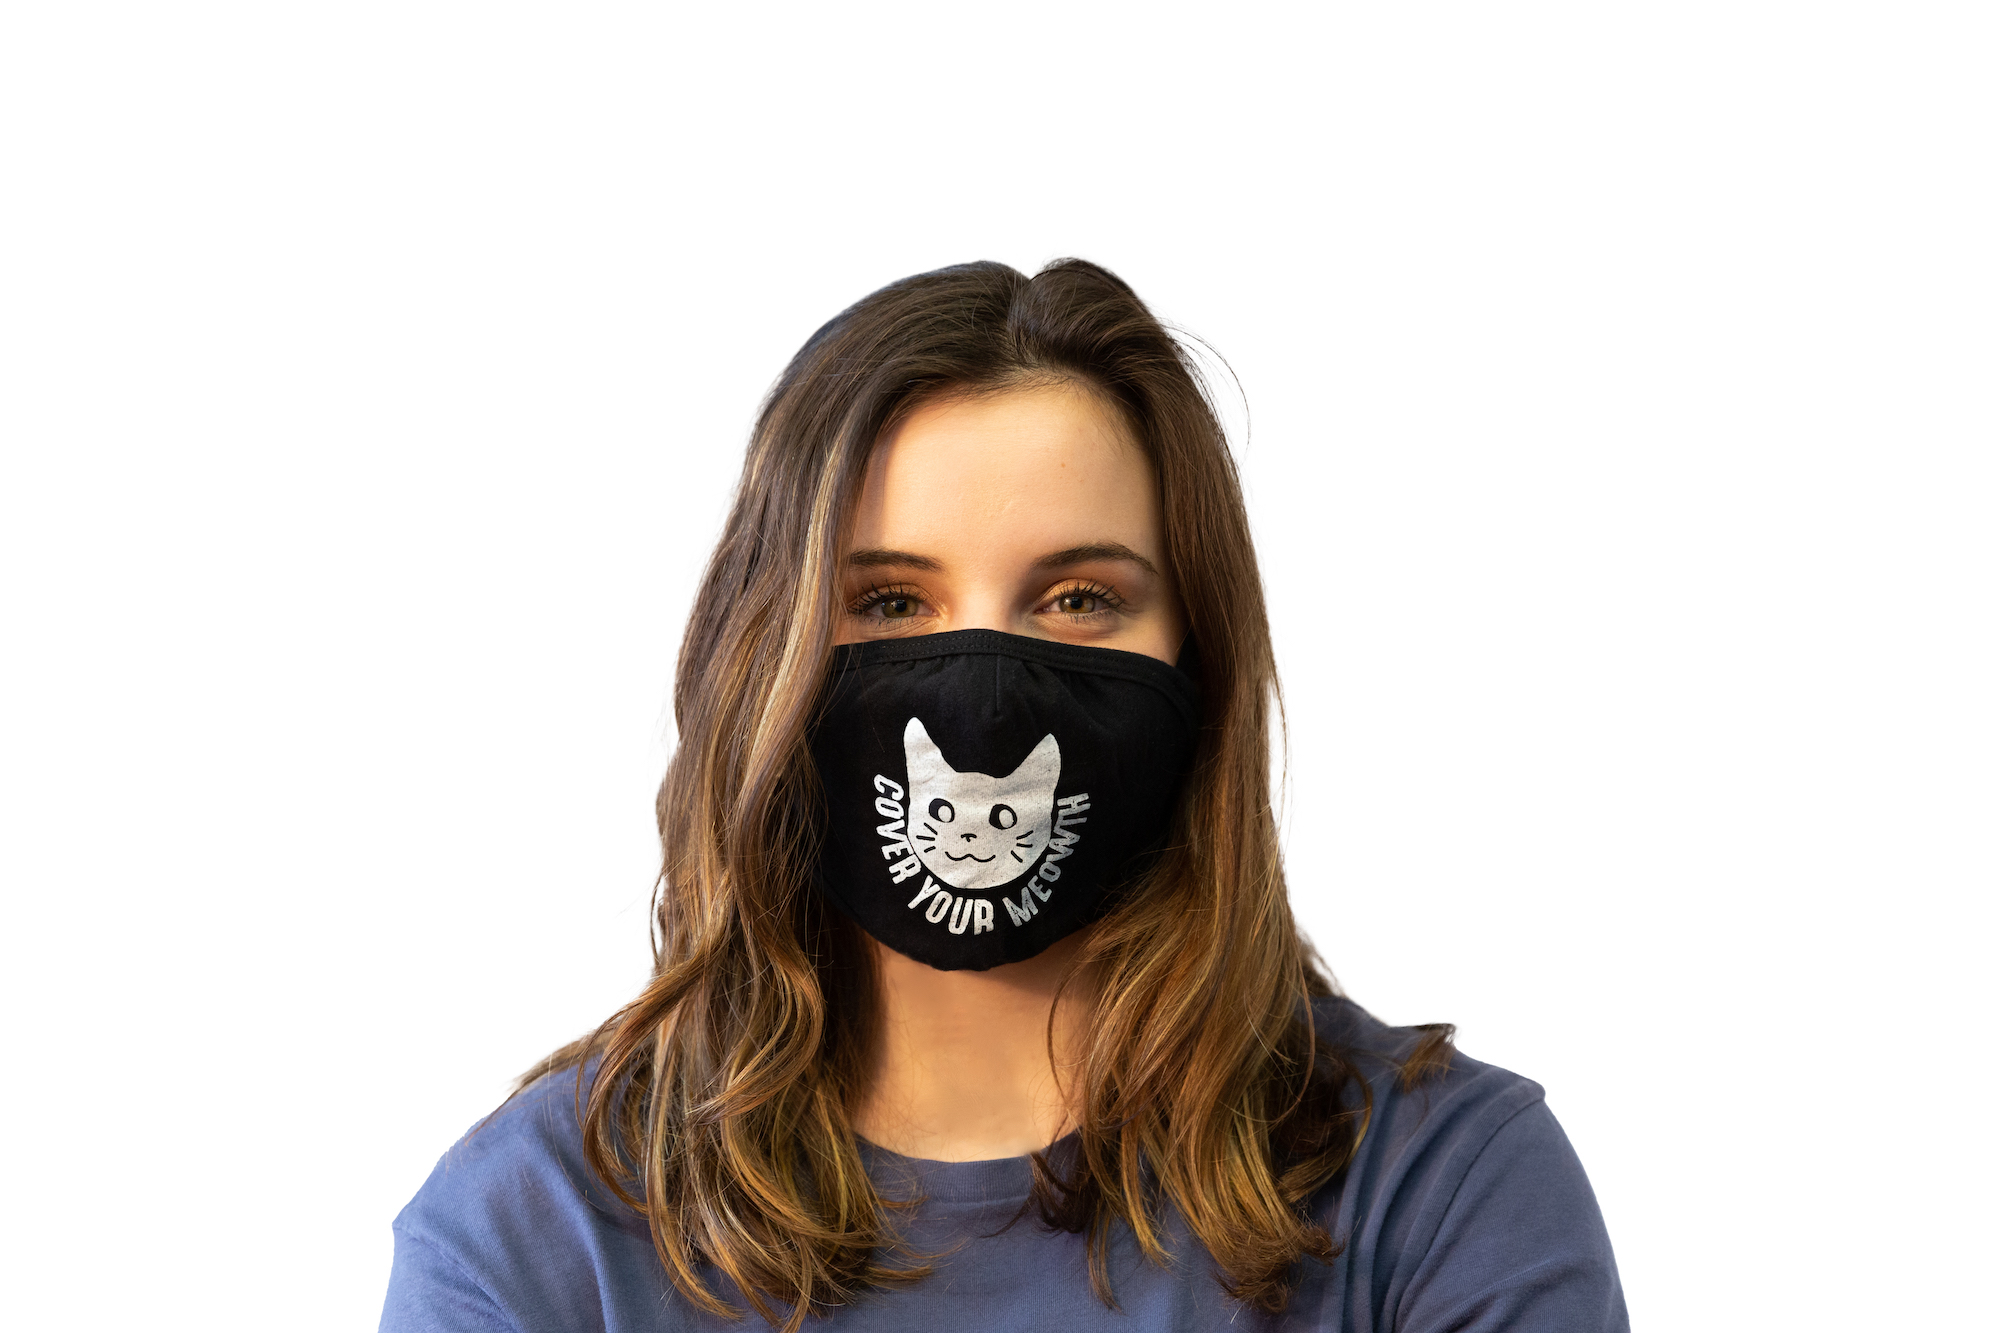 Cover Your Meow Face Mask Funny Crazy Cat Lady Graphic Novelty Nose And Mouth Covering - image 3 of 7